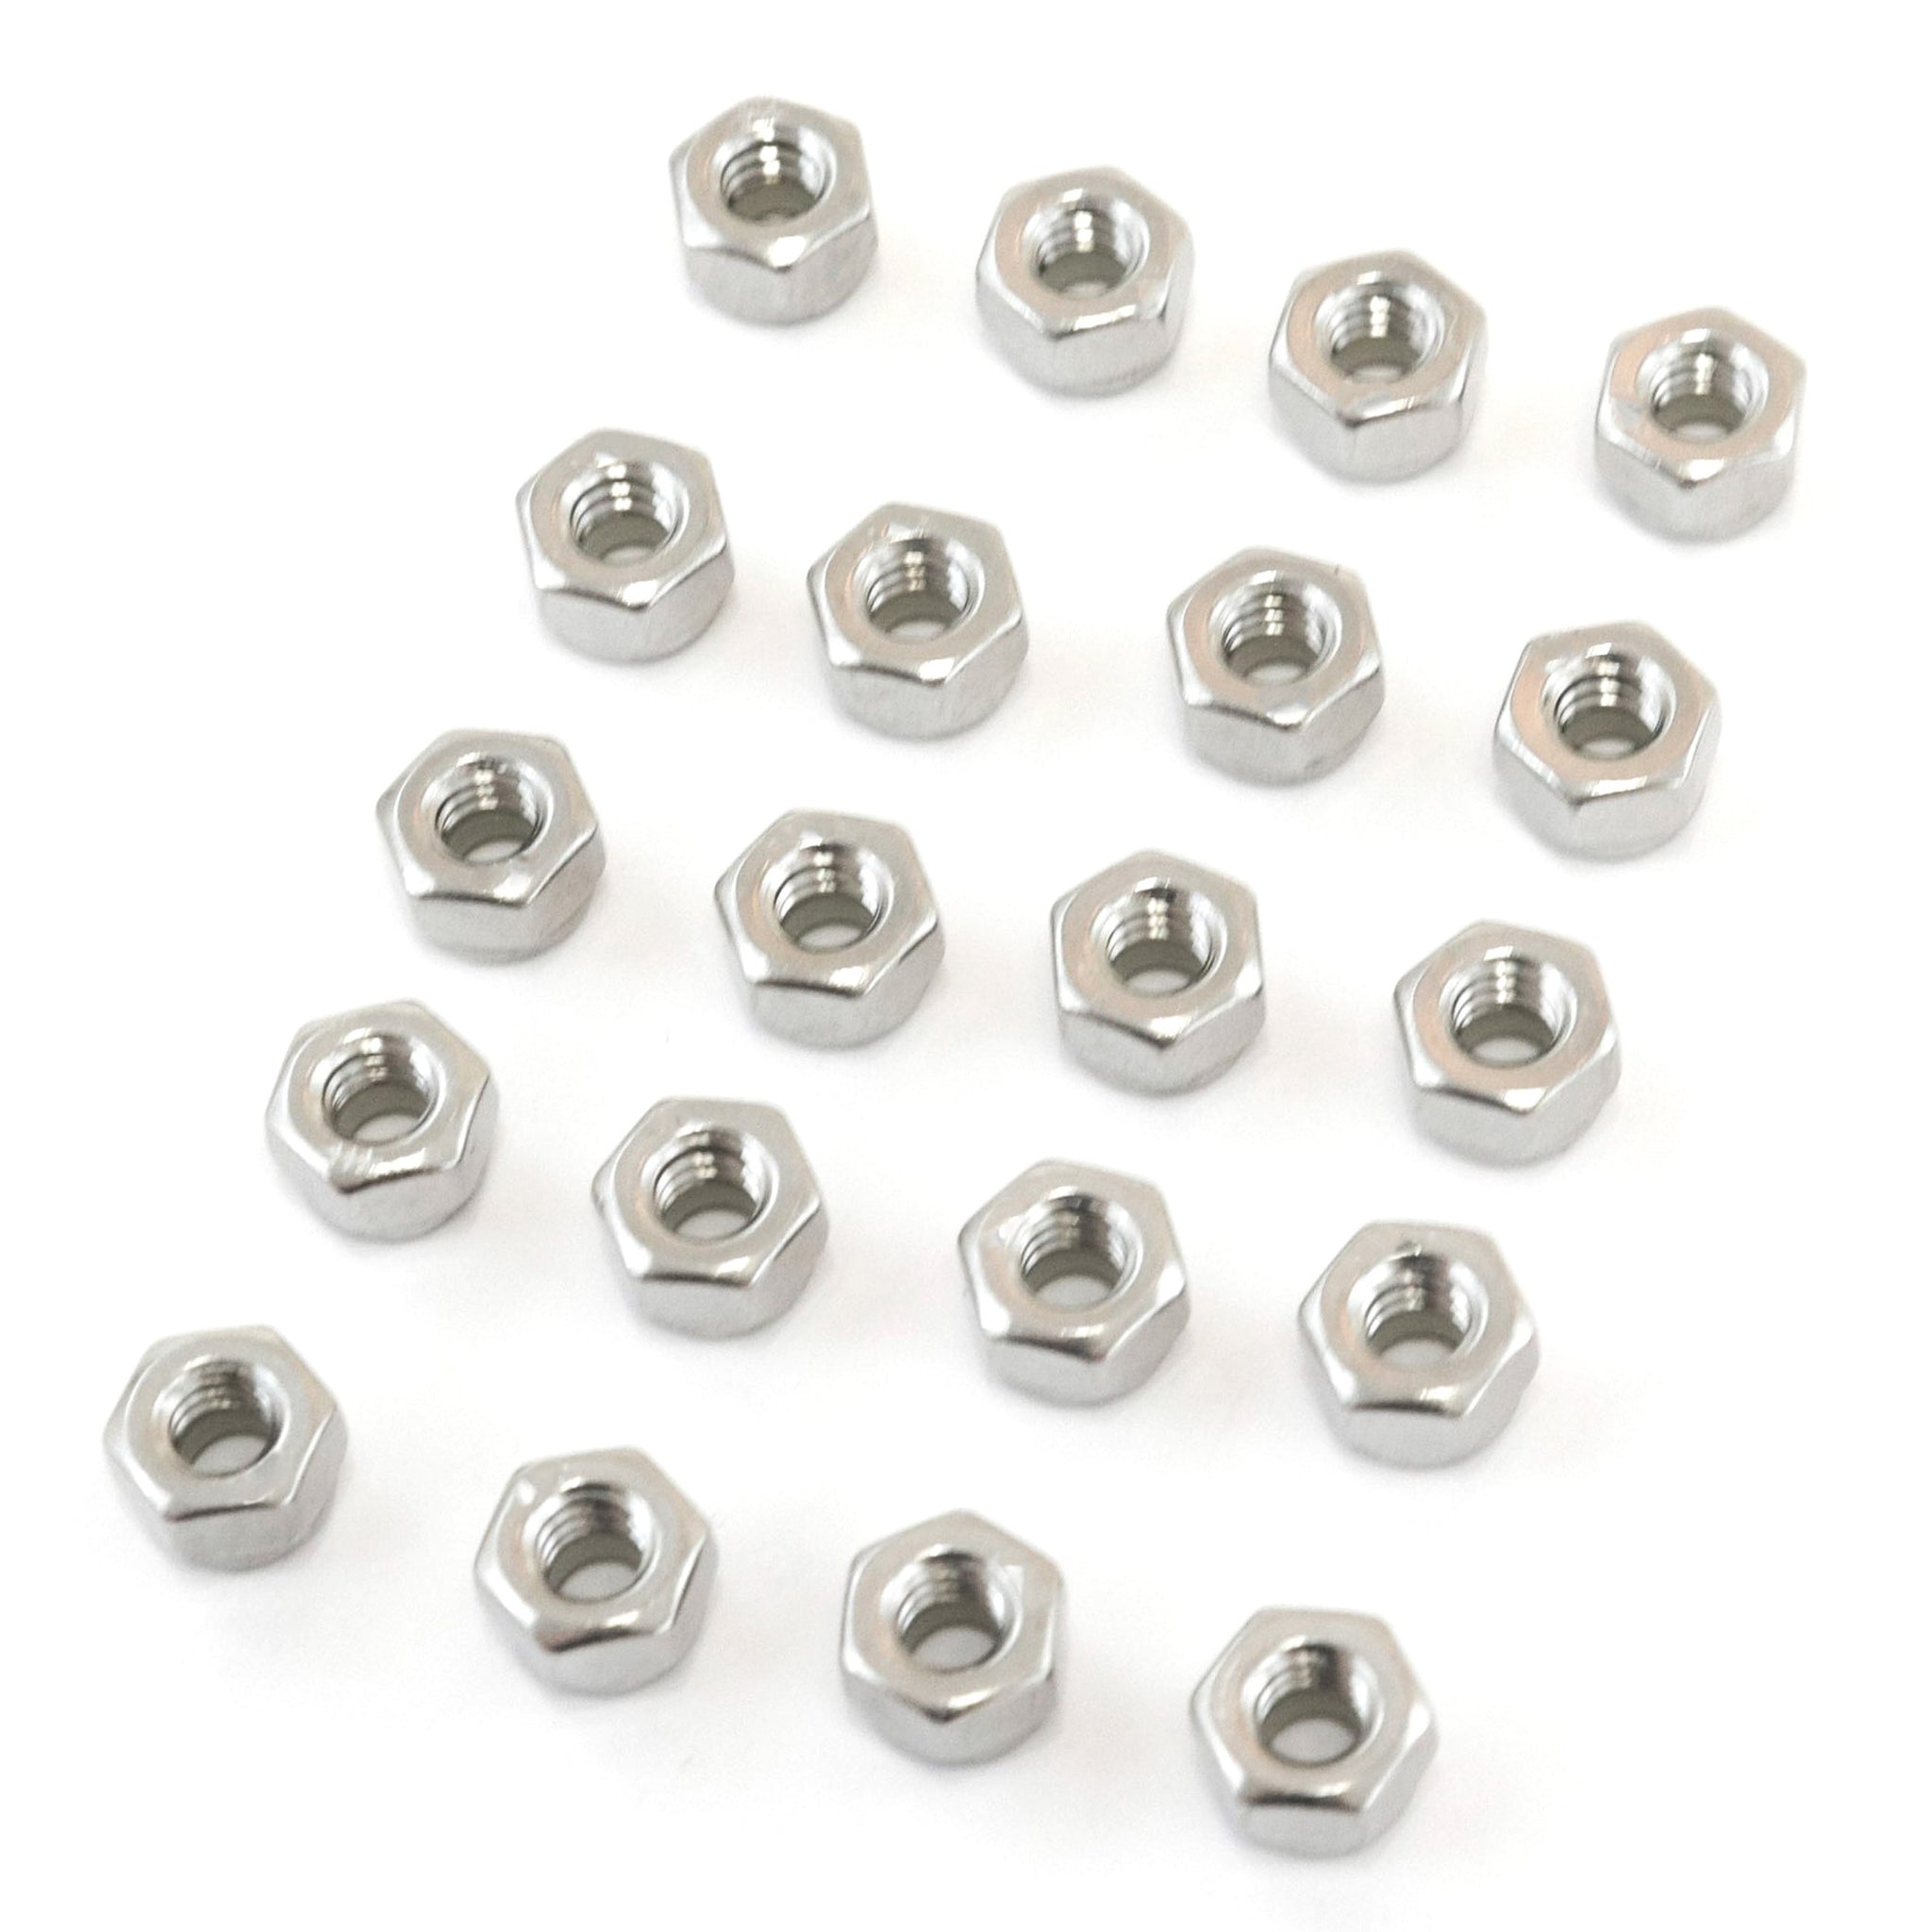 Red Hound Auto 20 Nylon Insert Lock Nut Set 1/4 Inch Diameter Hole Size for Bolt or Threaded Stud 304 SS Stainless Steel Corrosion Resistant 20 Standard Coarse Thread